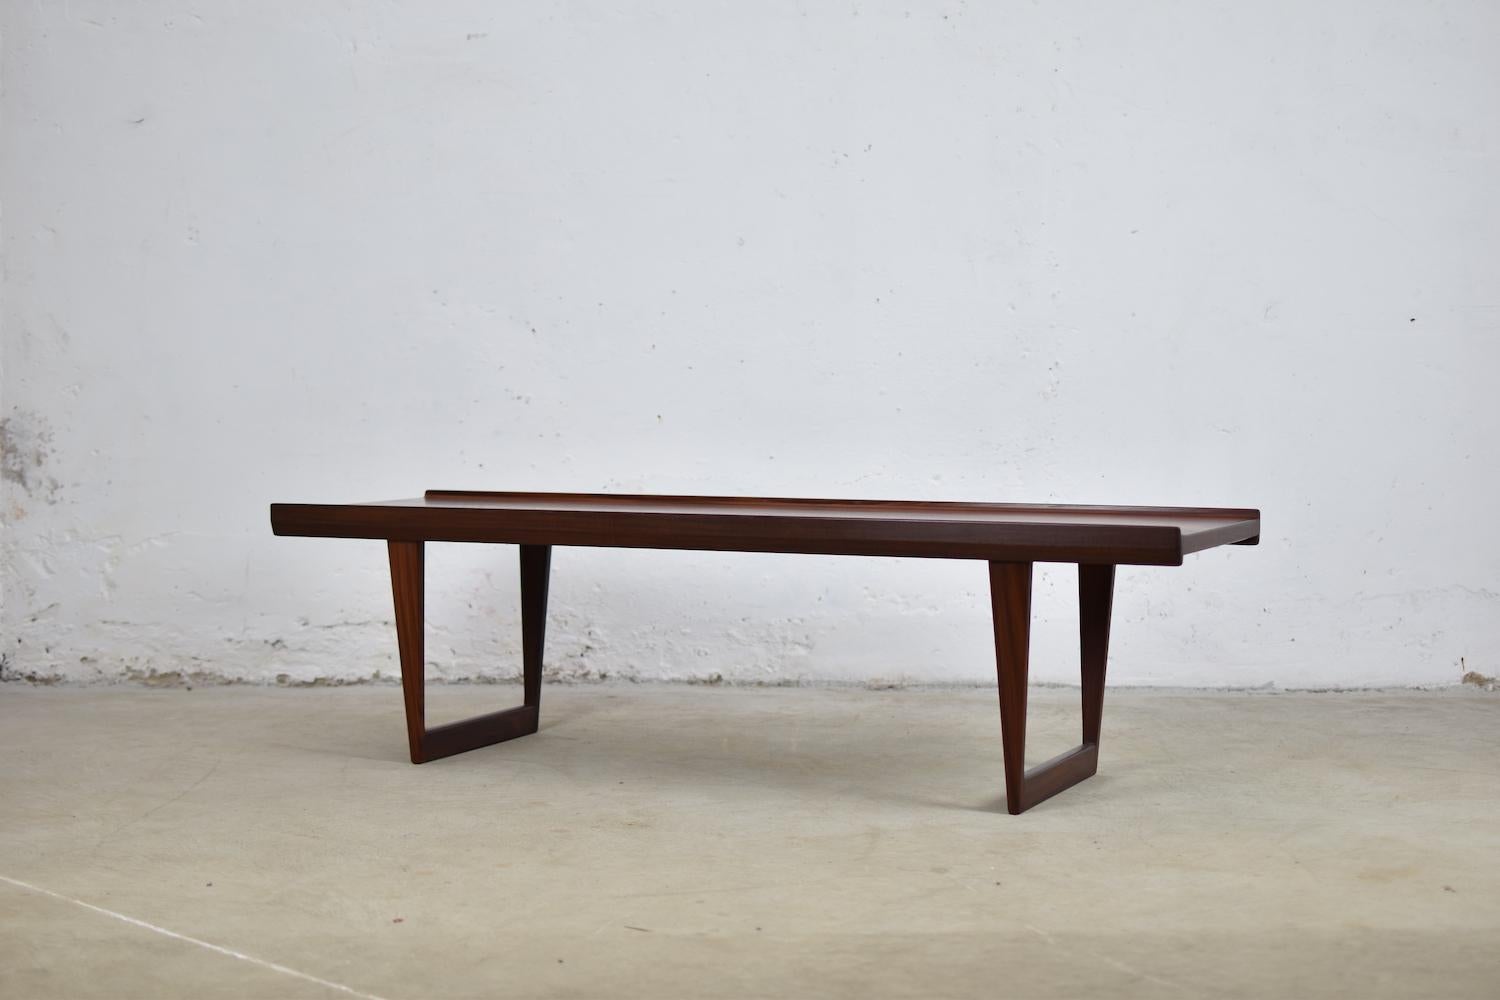 Lovely coffee table designed by Peter Løvig Nielsen for Løvig, Denmark, 1965. This table or bench features a teak slated base and a teak top with raised edges. Labeled underneath.